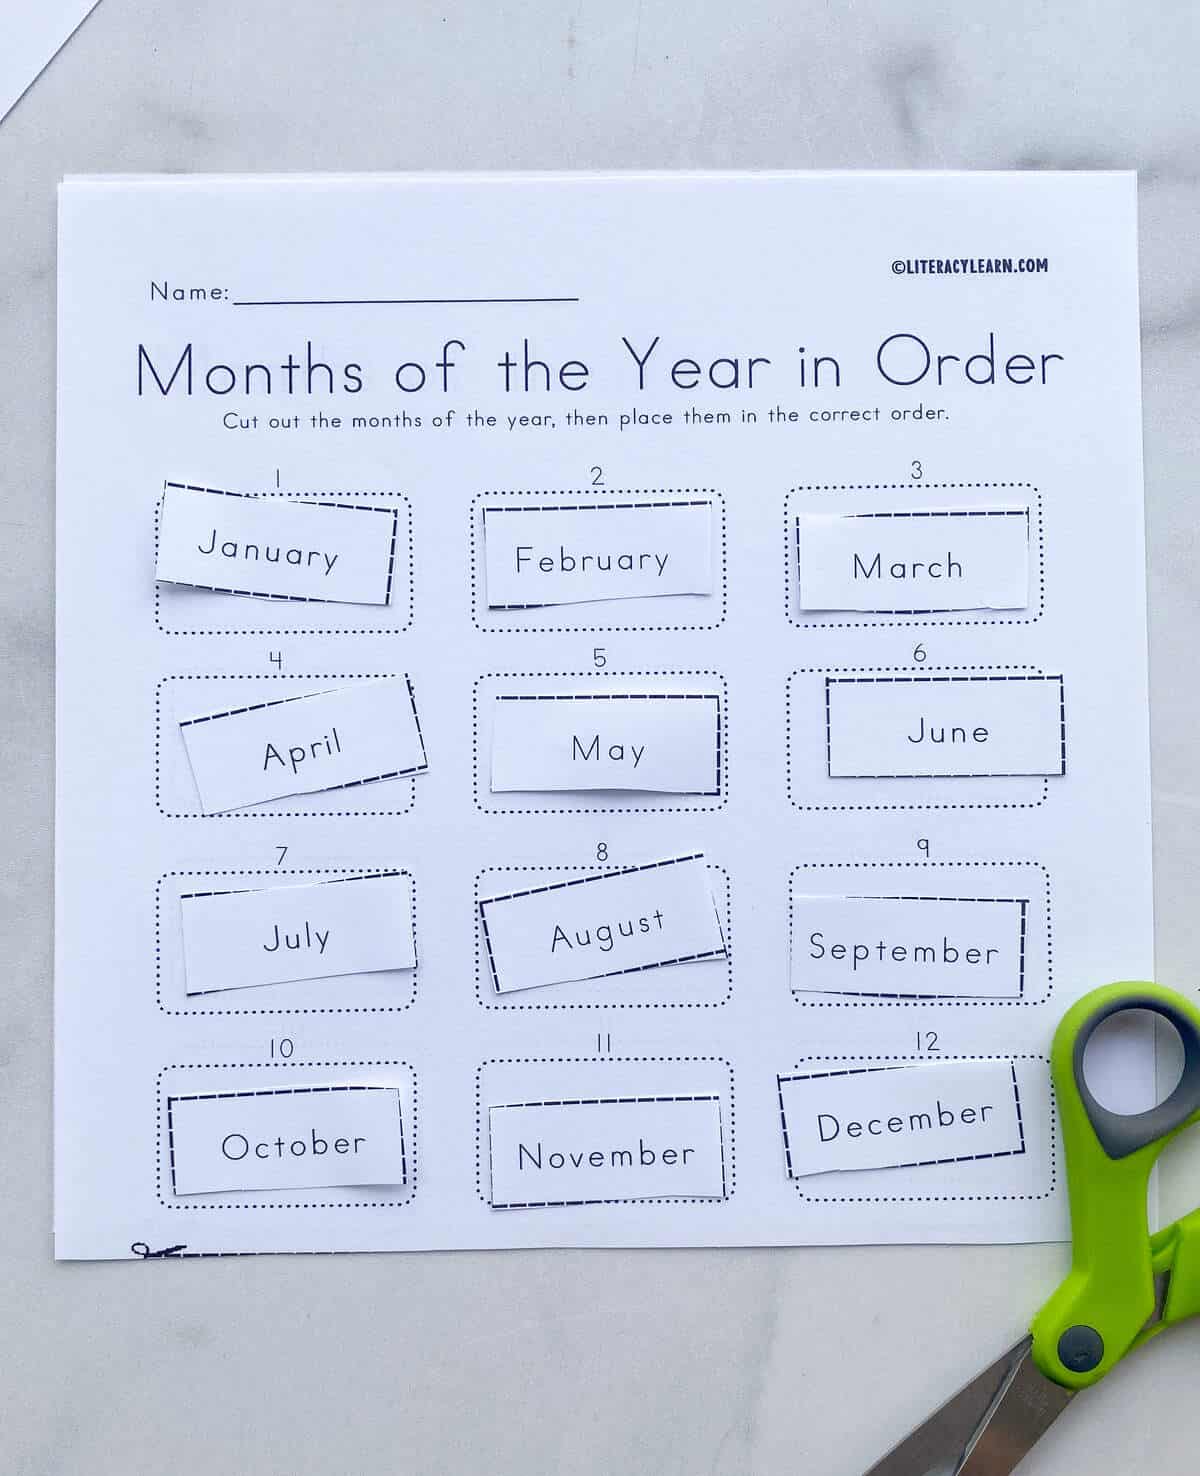 The finished worksheet with all the months cut out and placed in the correct order.